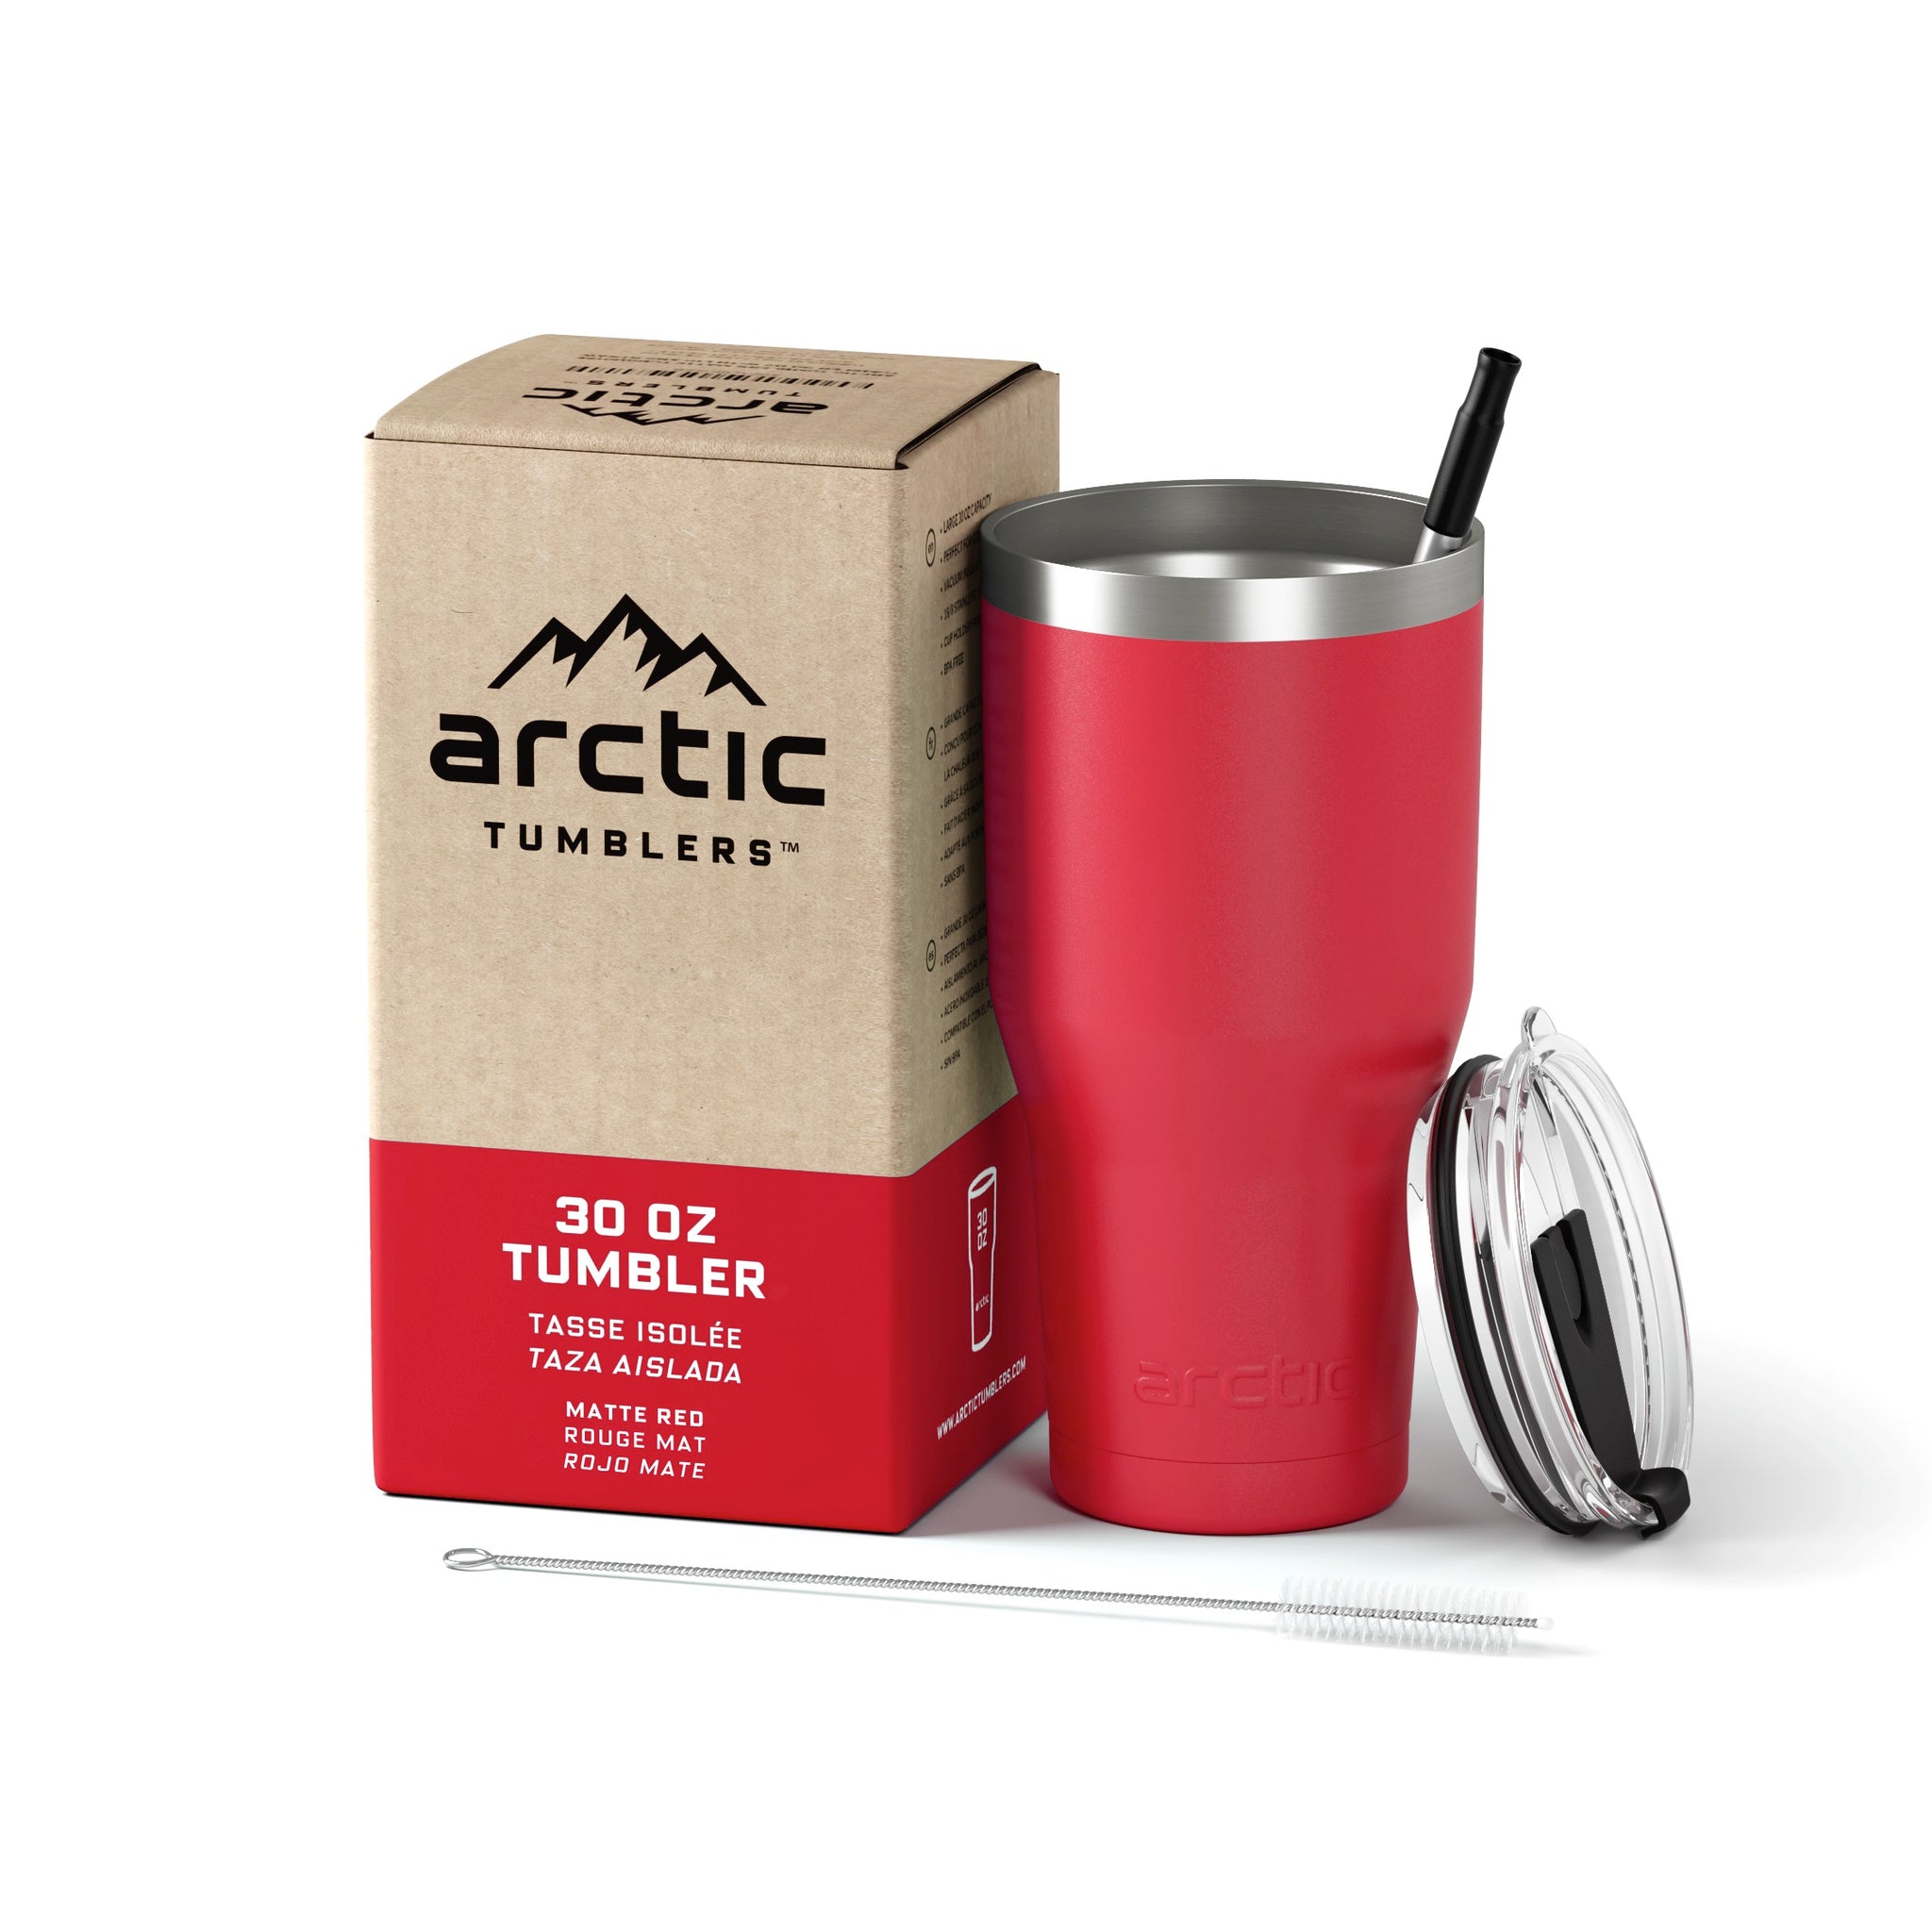 20oz RED VACUUM INSULATED STAINLESS STEEL TUMBLER WITH STRAW